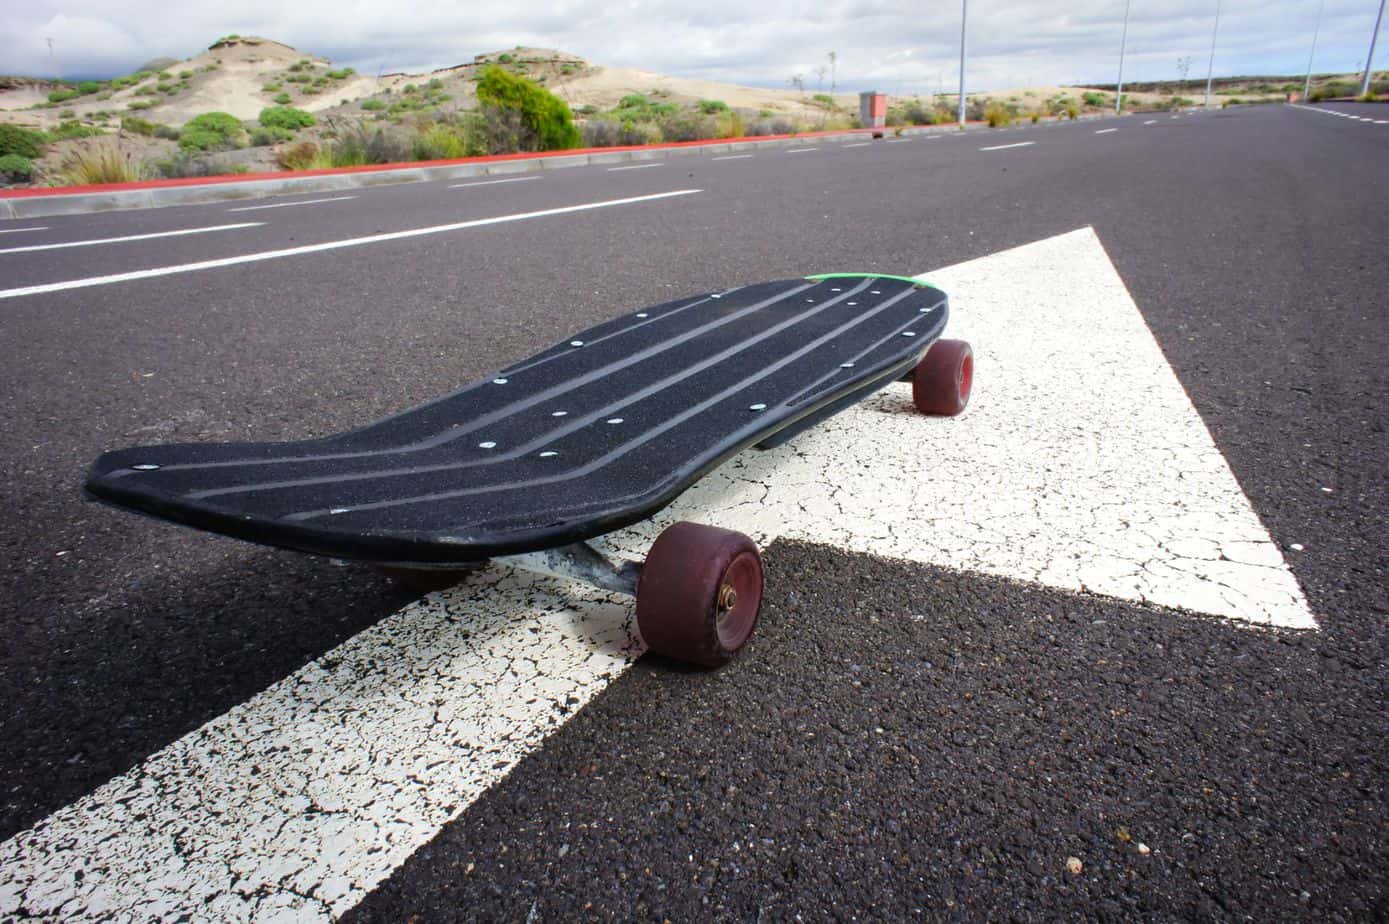 What is a Kicktail Longboard?